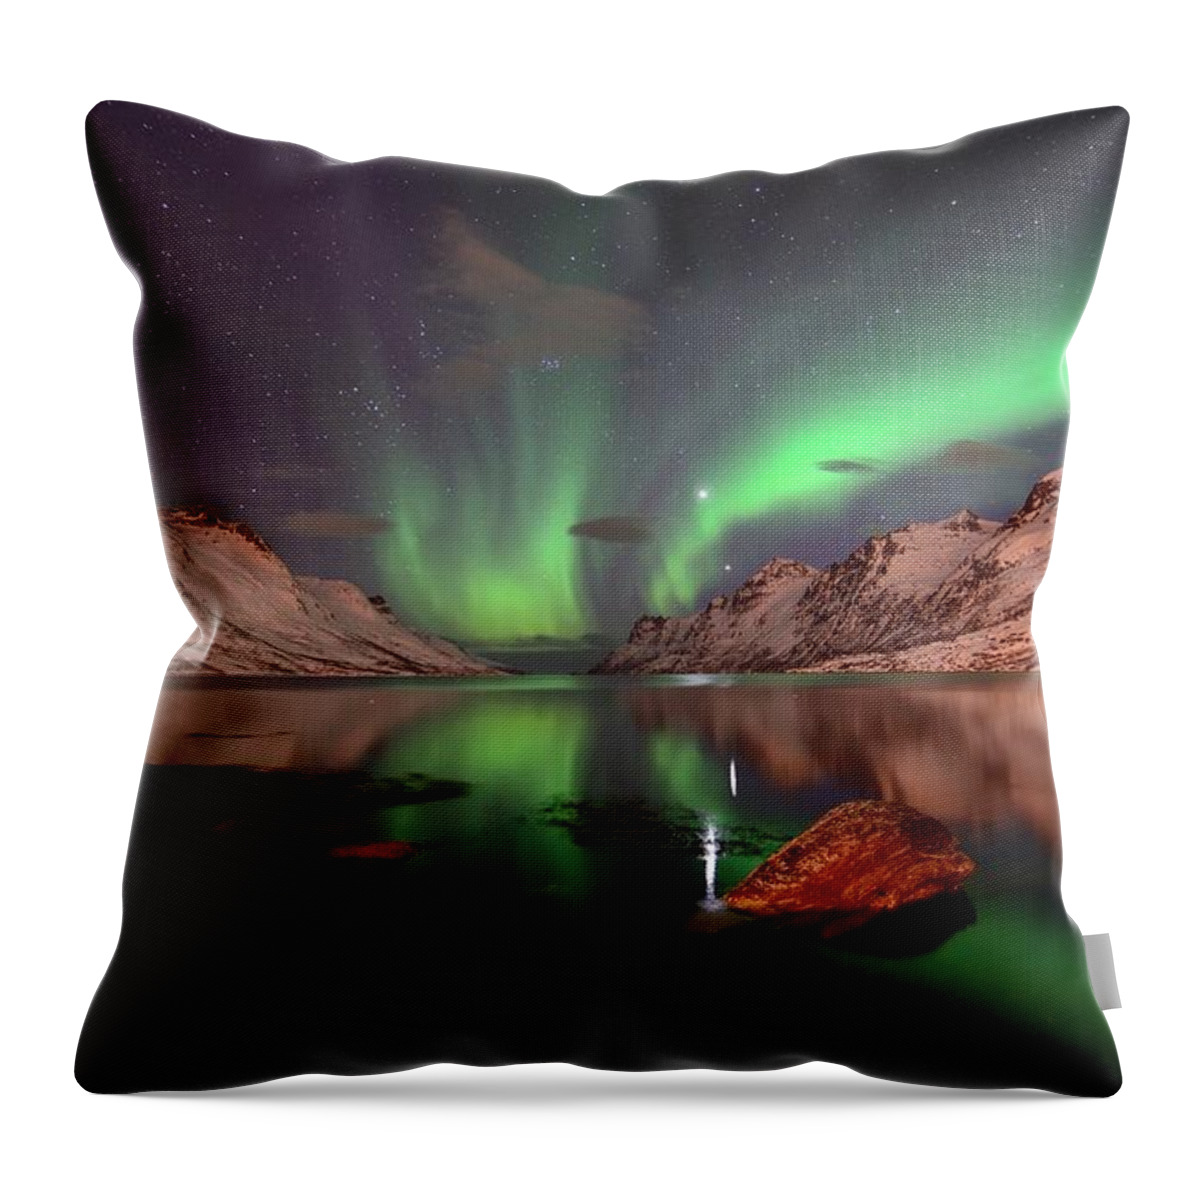 Tranquility Throw Pillow featuring the photograph Jupiter And Venus In Ersfjordbotn by John Hemmingsen